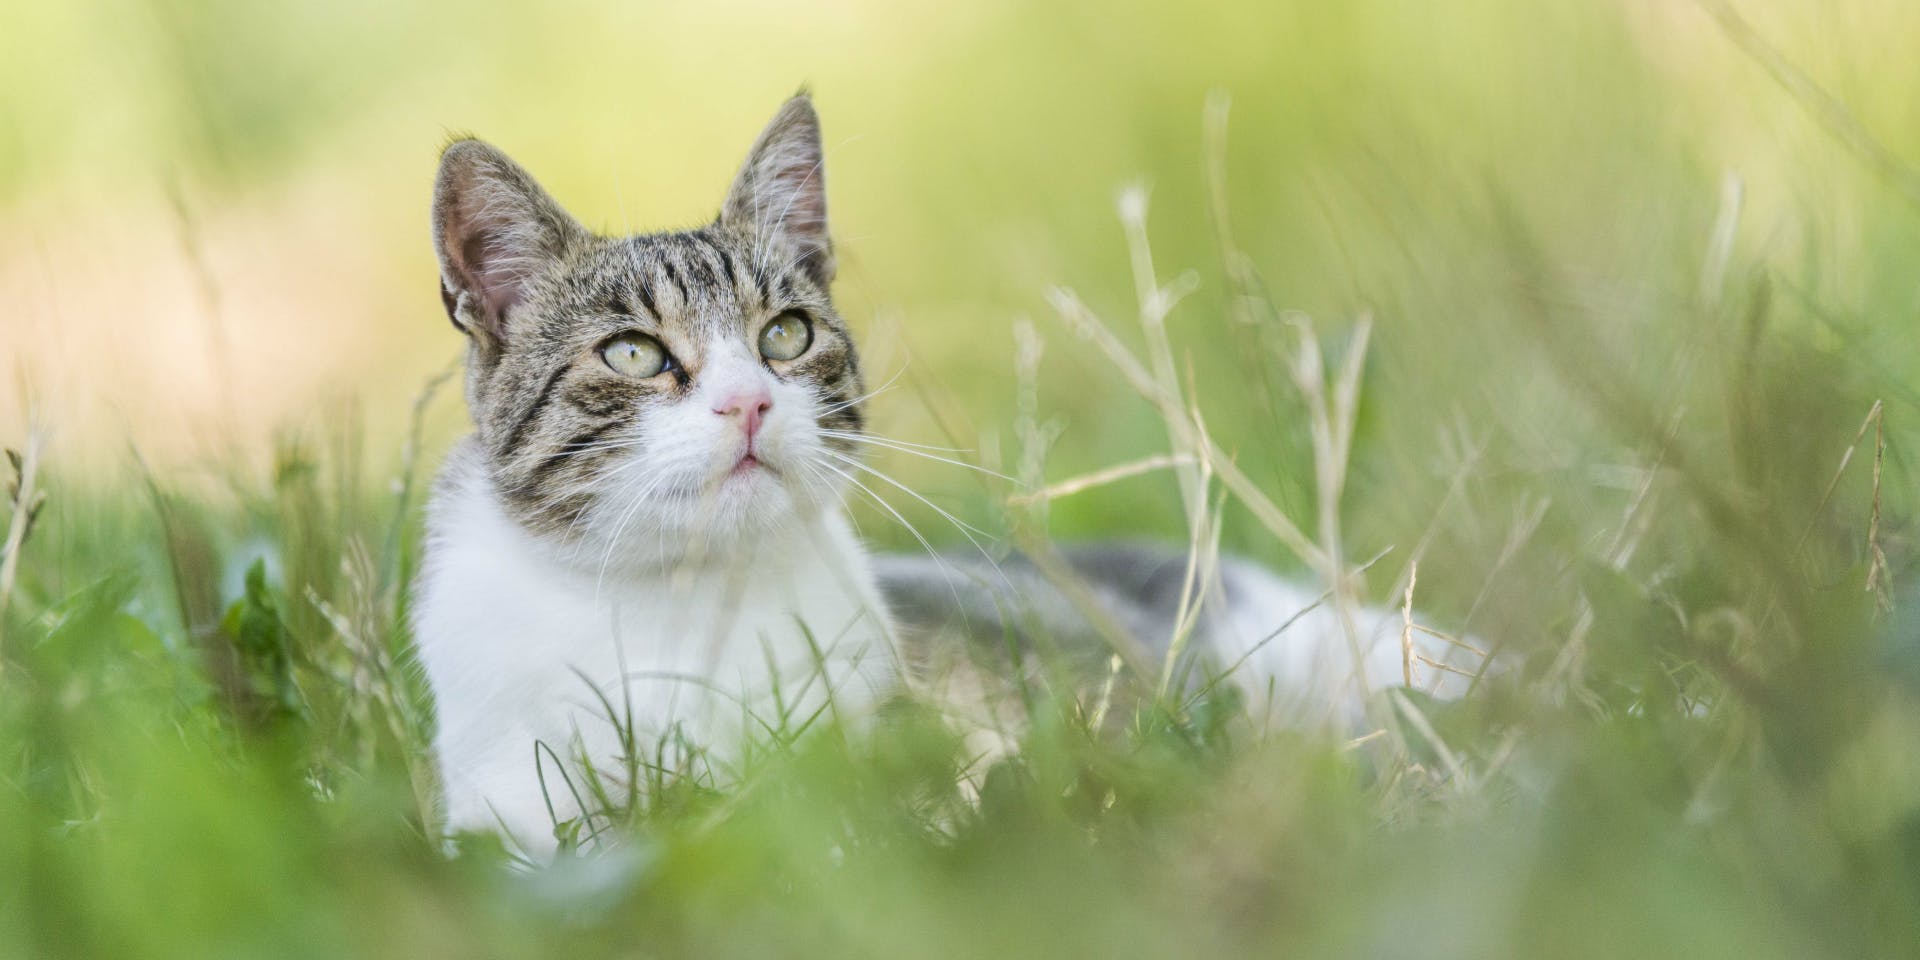 A brown and white cat sitting in the grass.